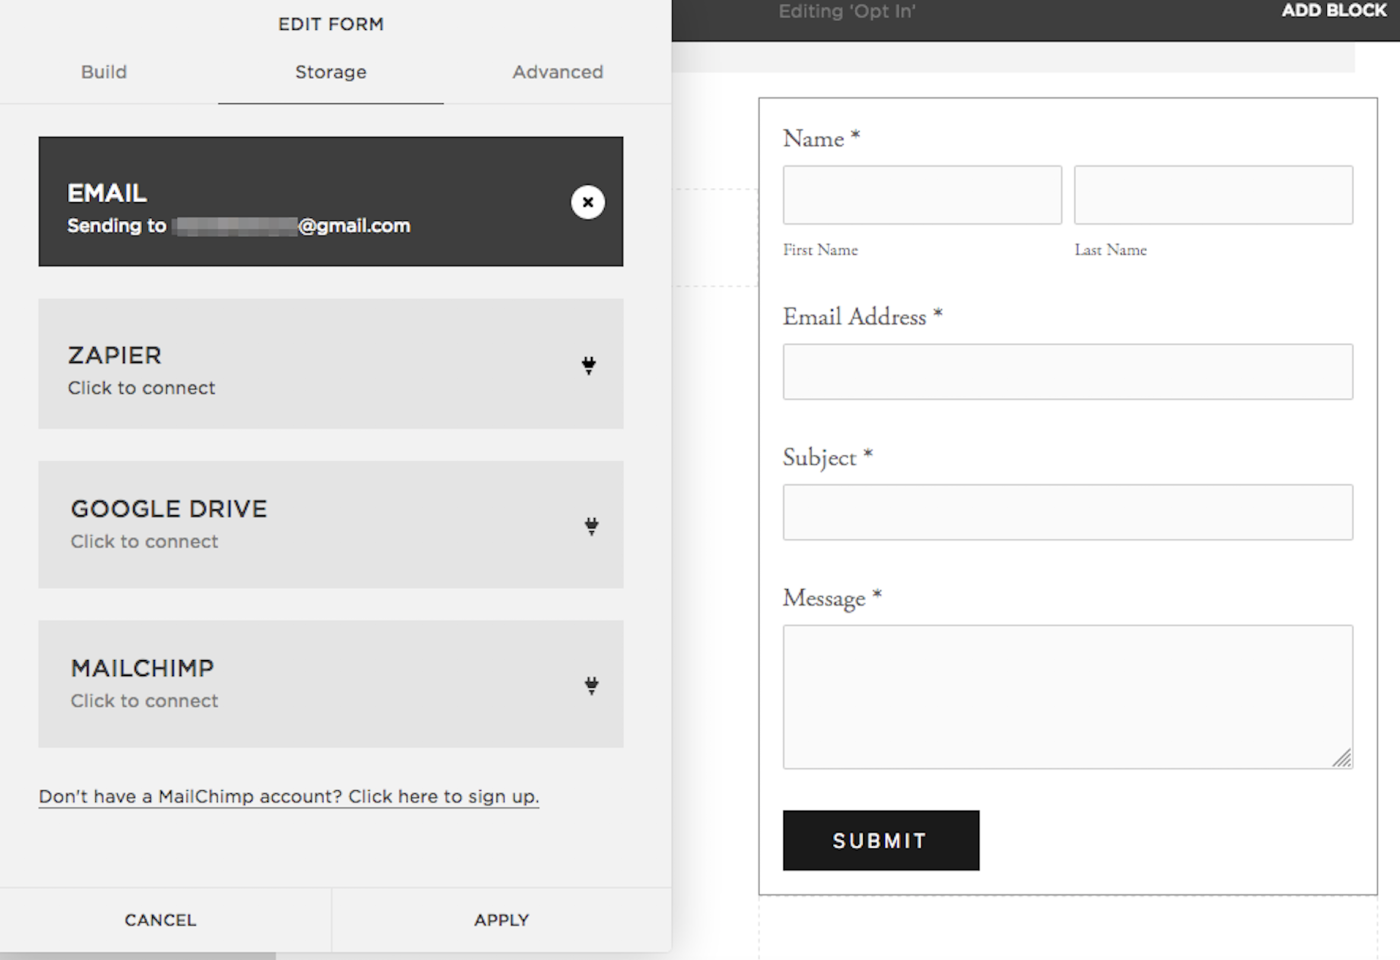 Squarespace opt-in forms